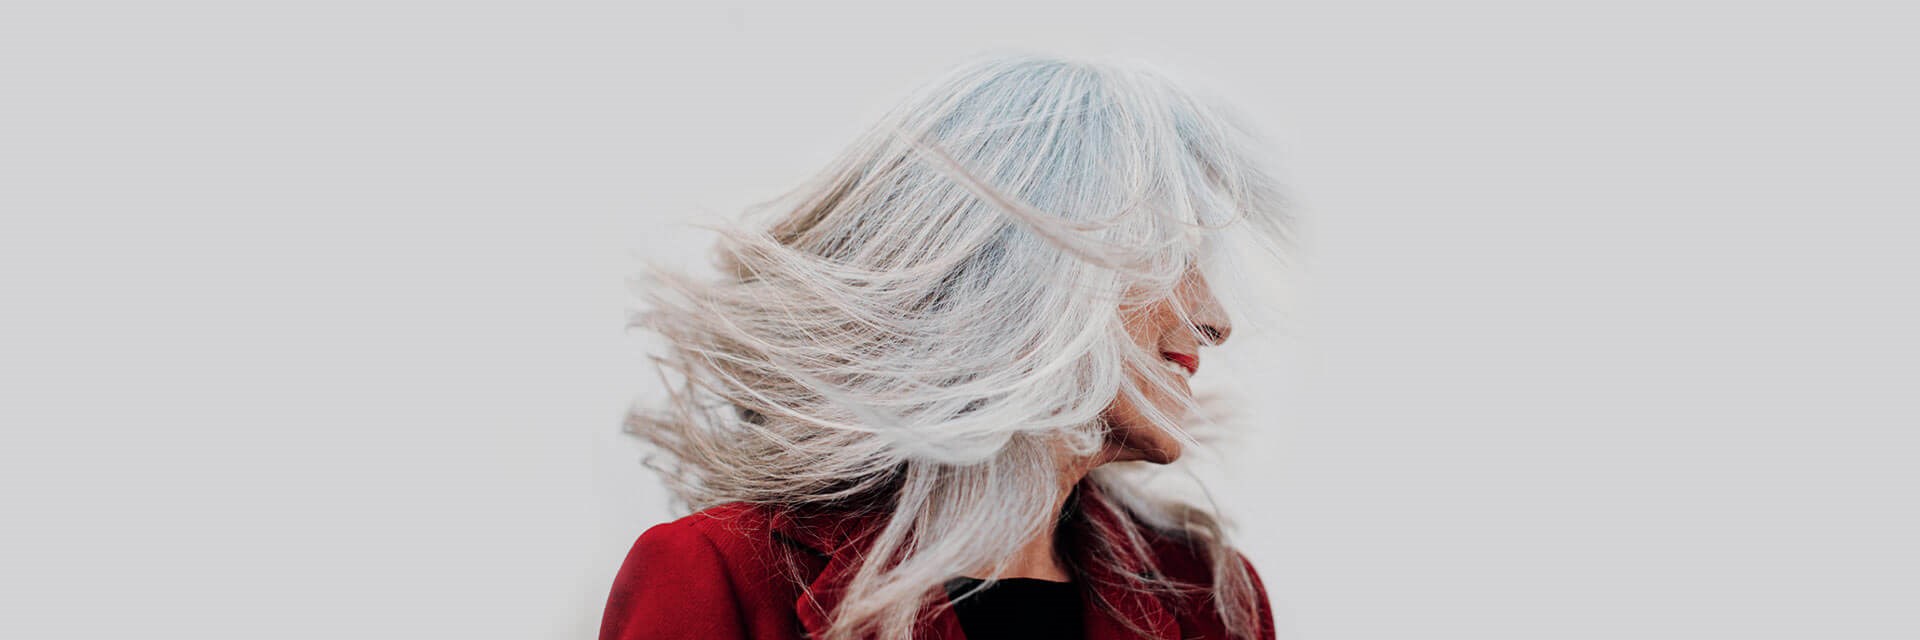 Grey-haired lady in red jacket tossing her hair